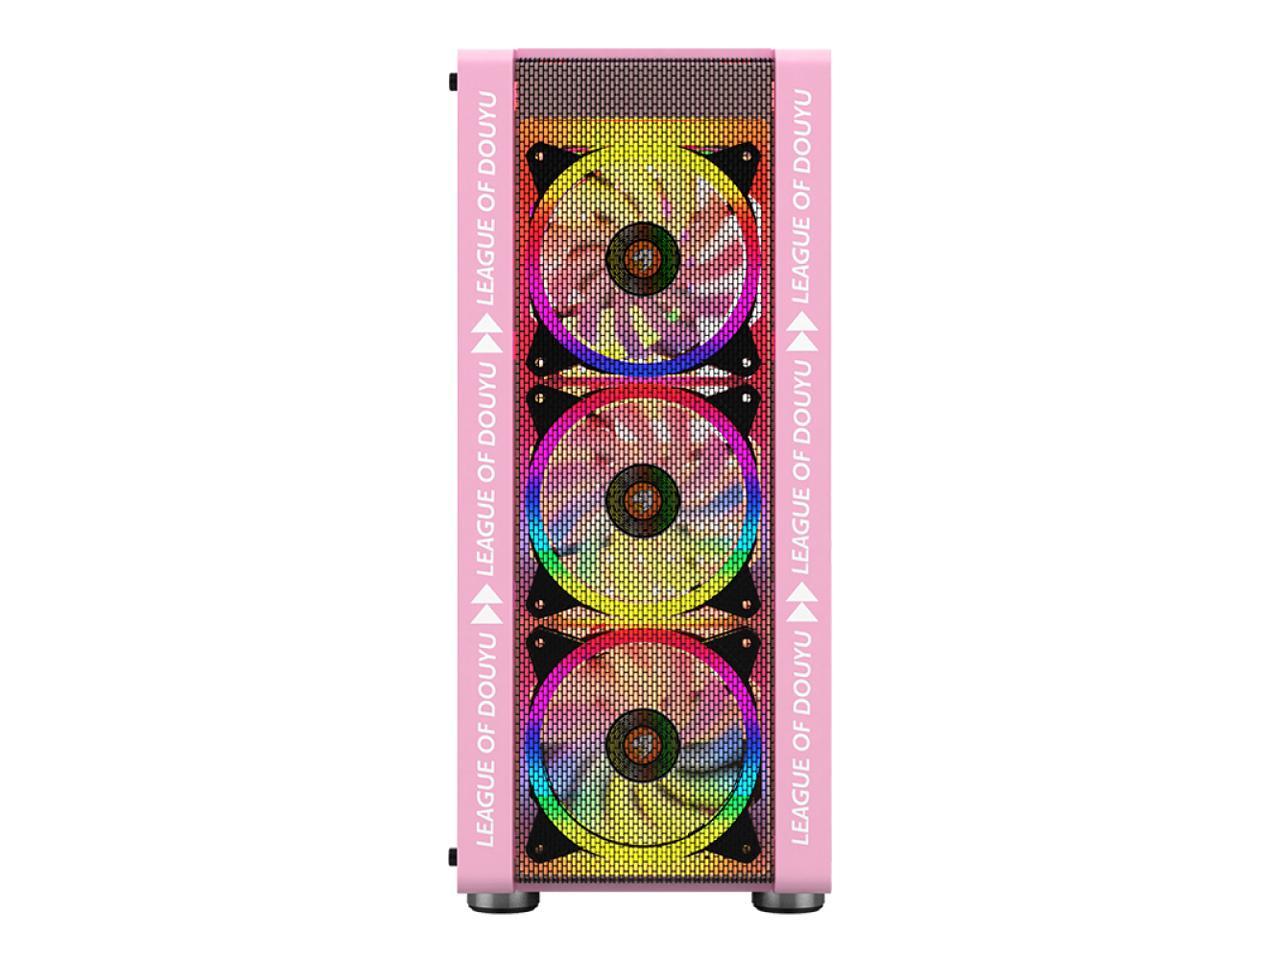 330-9 Gaming Computer Case Host Supports Atx Microe Atx Motherboard 240Mm Water Cooler Game Chassis Case Rgb Pink